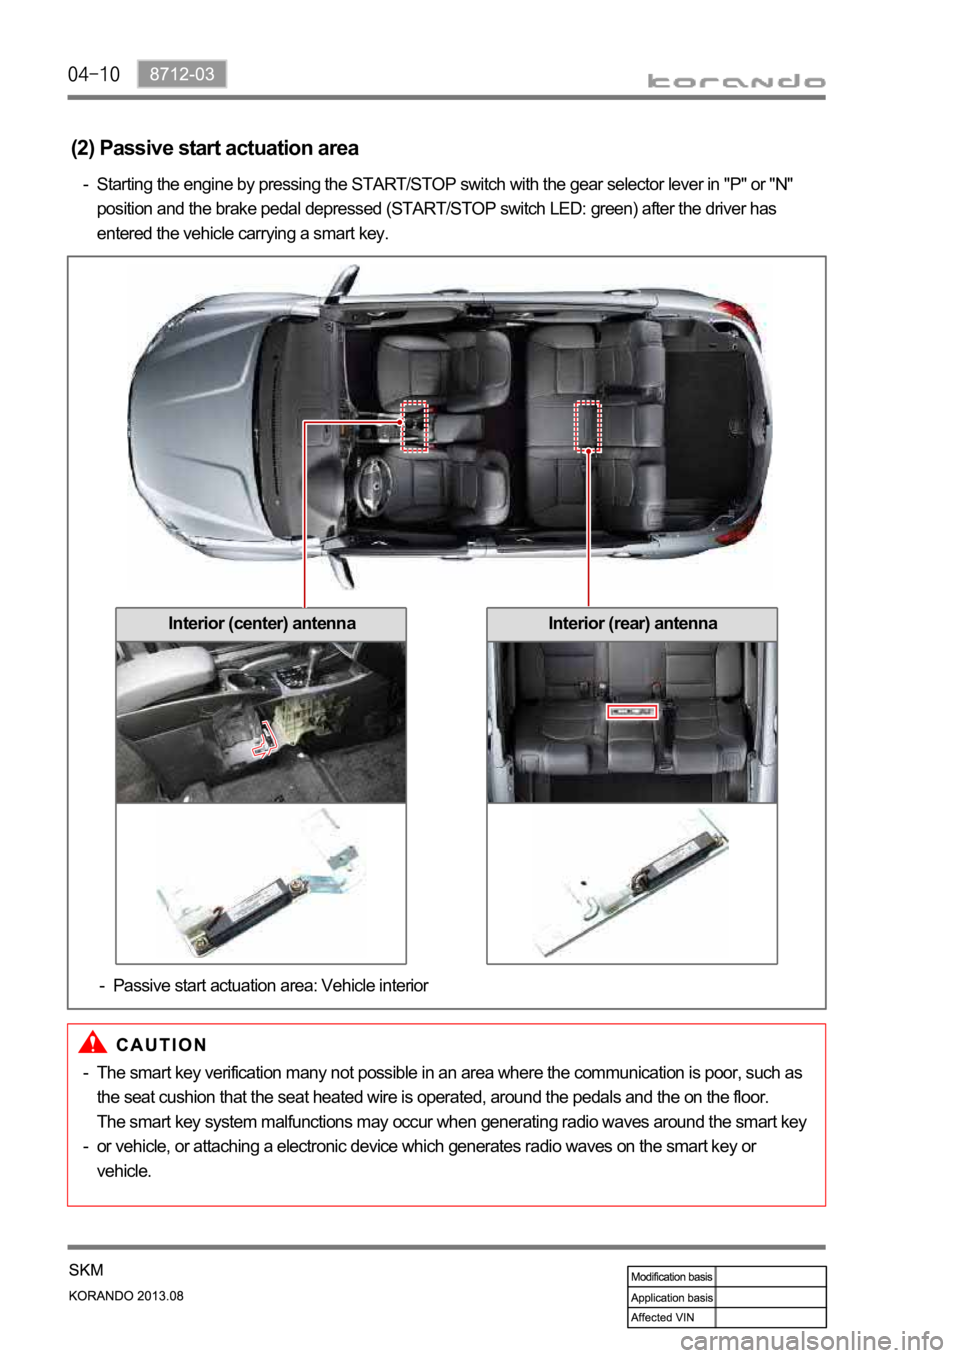 SSANGYONG KORANDO 2013  Service Manual Interior (center) antennaInterior (rear) antenna
The smart key verification many not possible in an area where the communication is poor, such as 
the seat cushion that the seat heated wire is operate